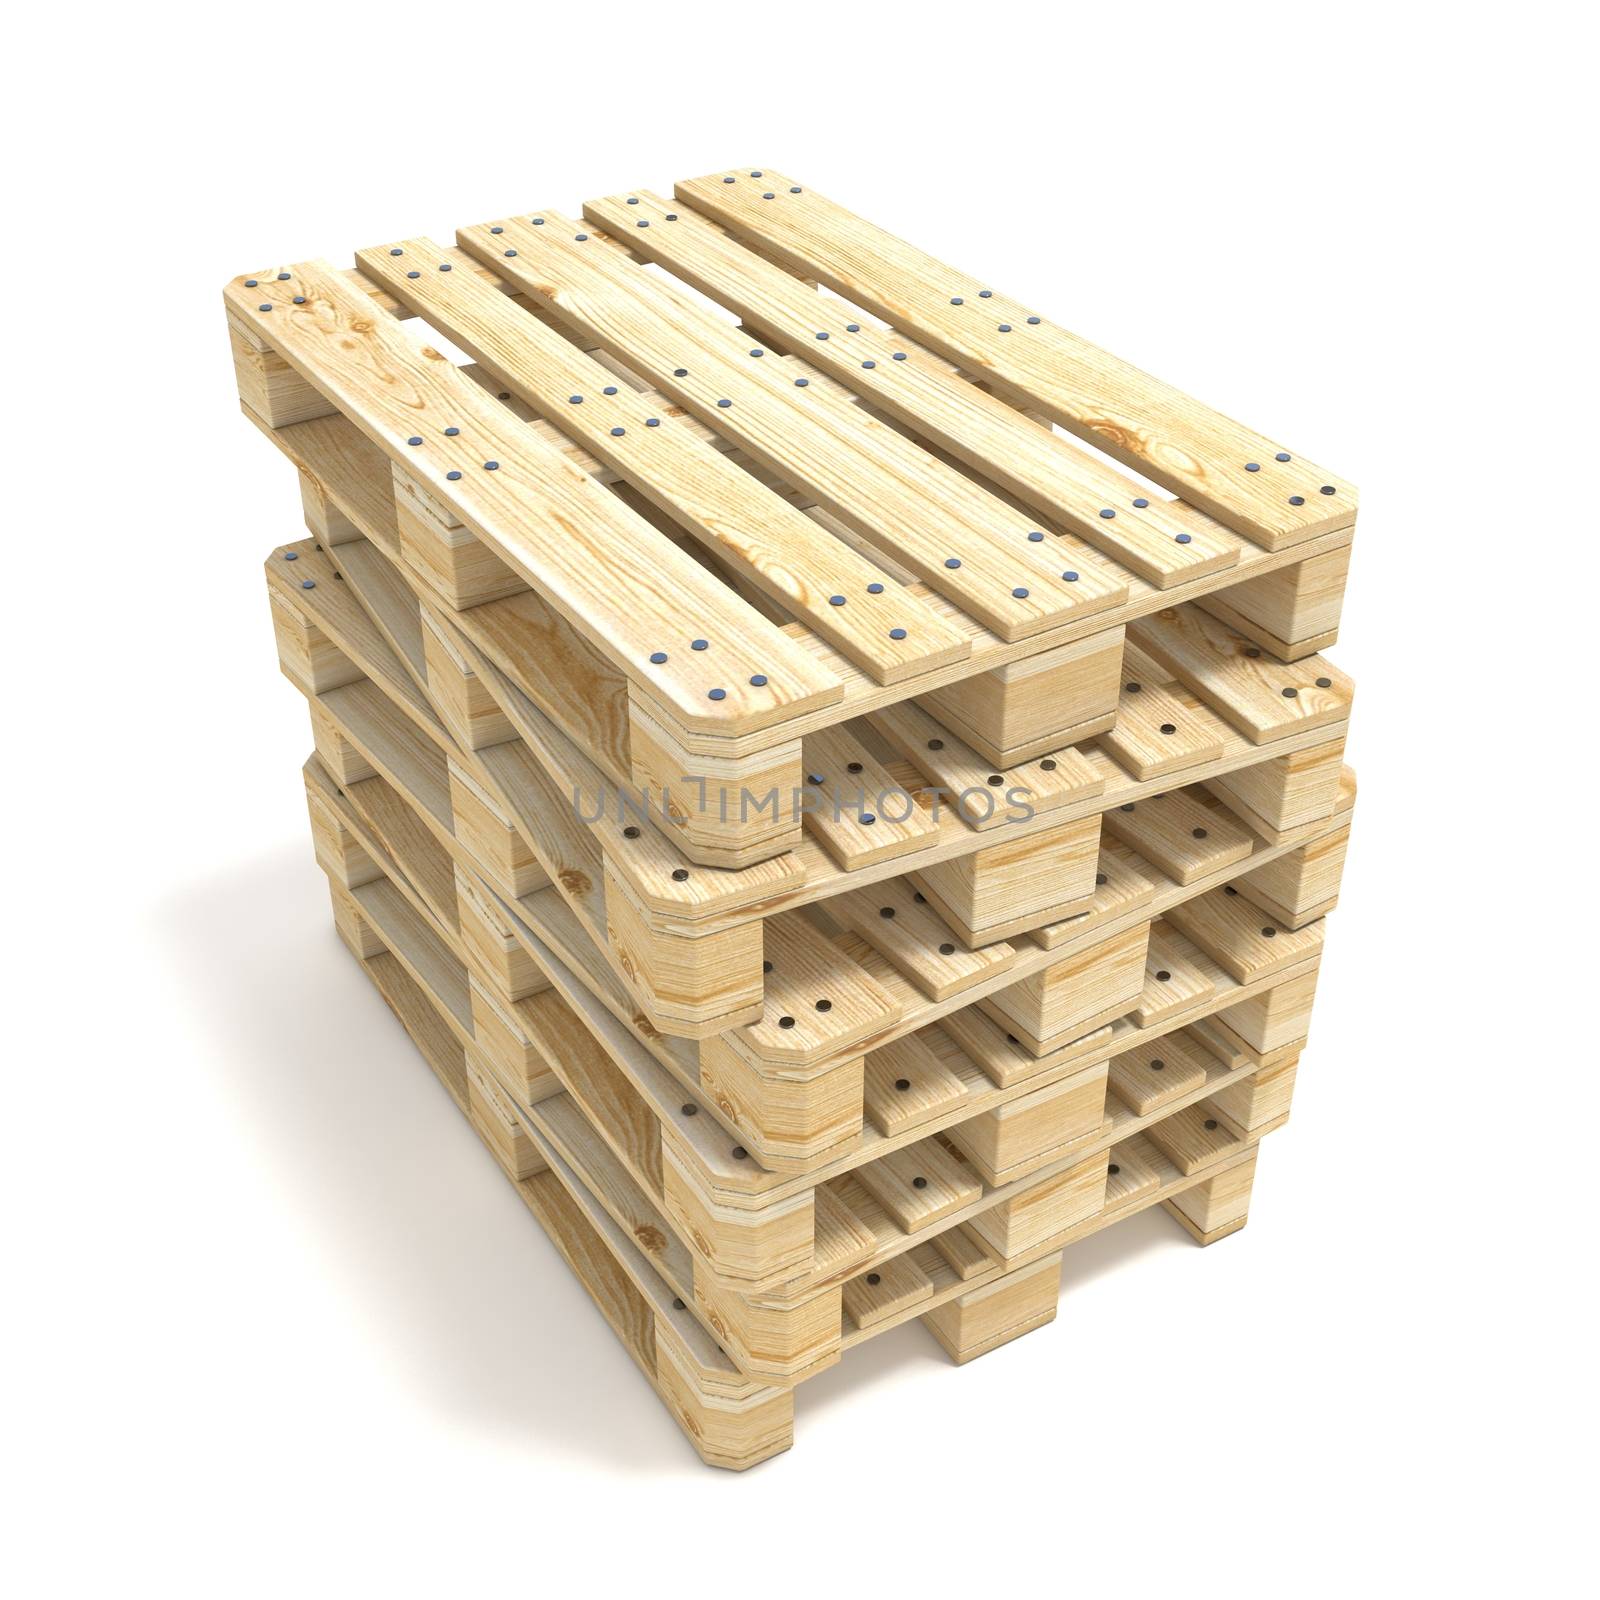 Wooden Euro pallets. 3D render illustration isolated on white background